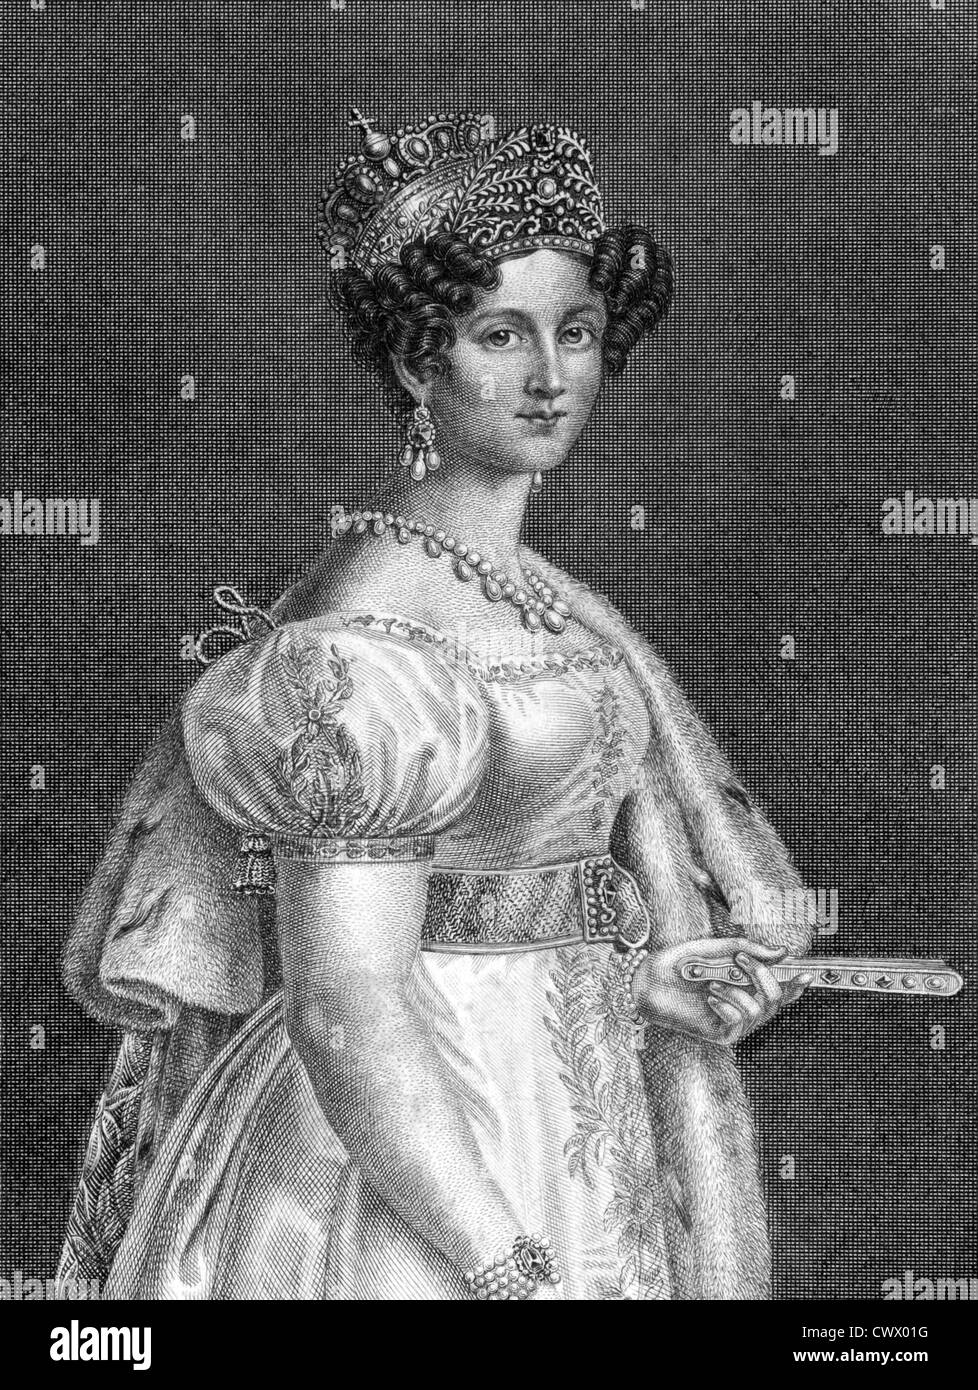 Therese of Saxe-Hildburghausen (1792-1854) on engraving from 1859. Queen of Bavaria. Stock Photo